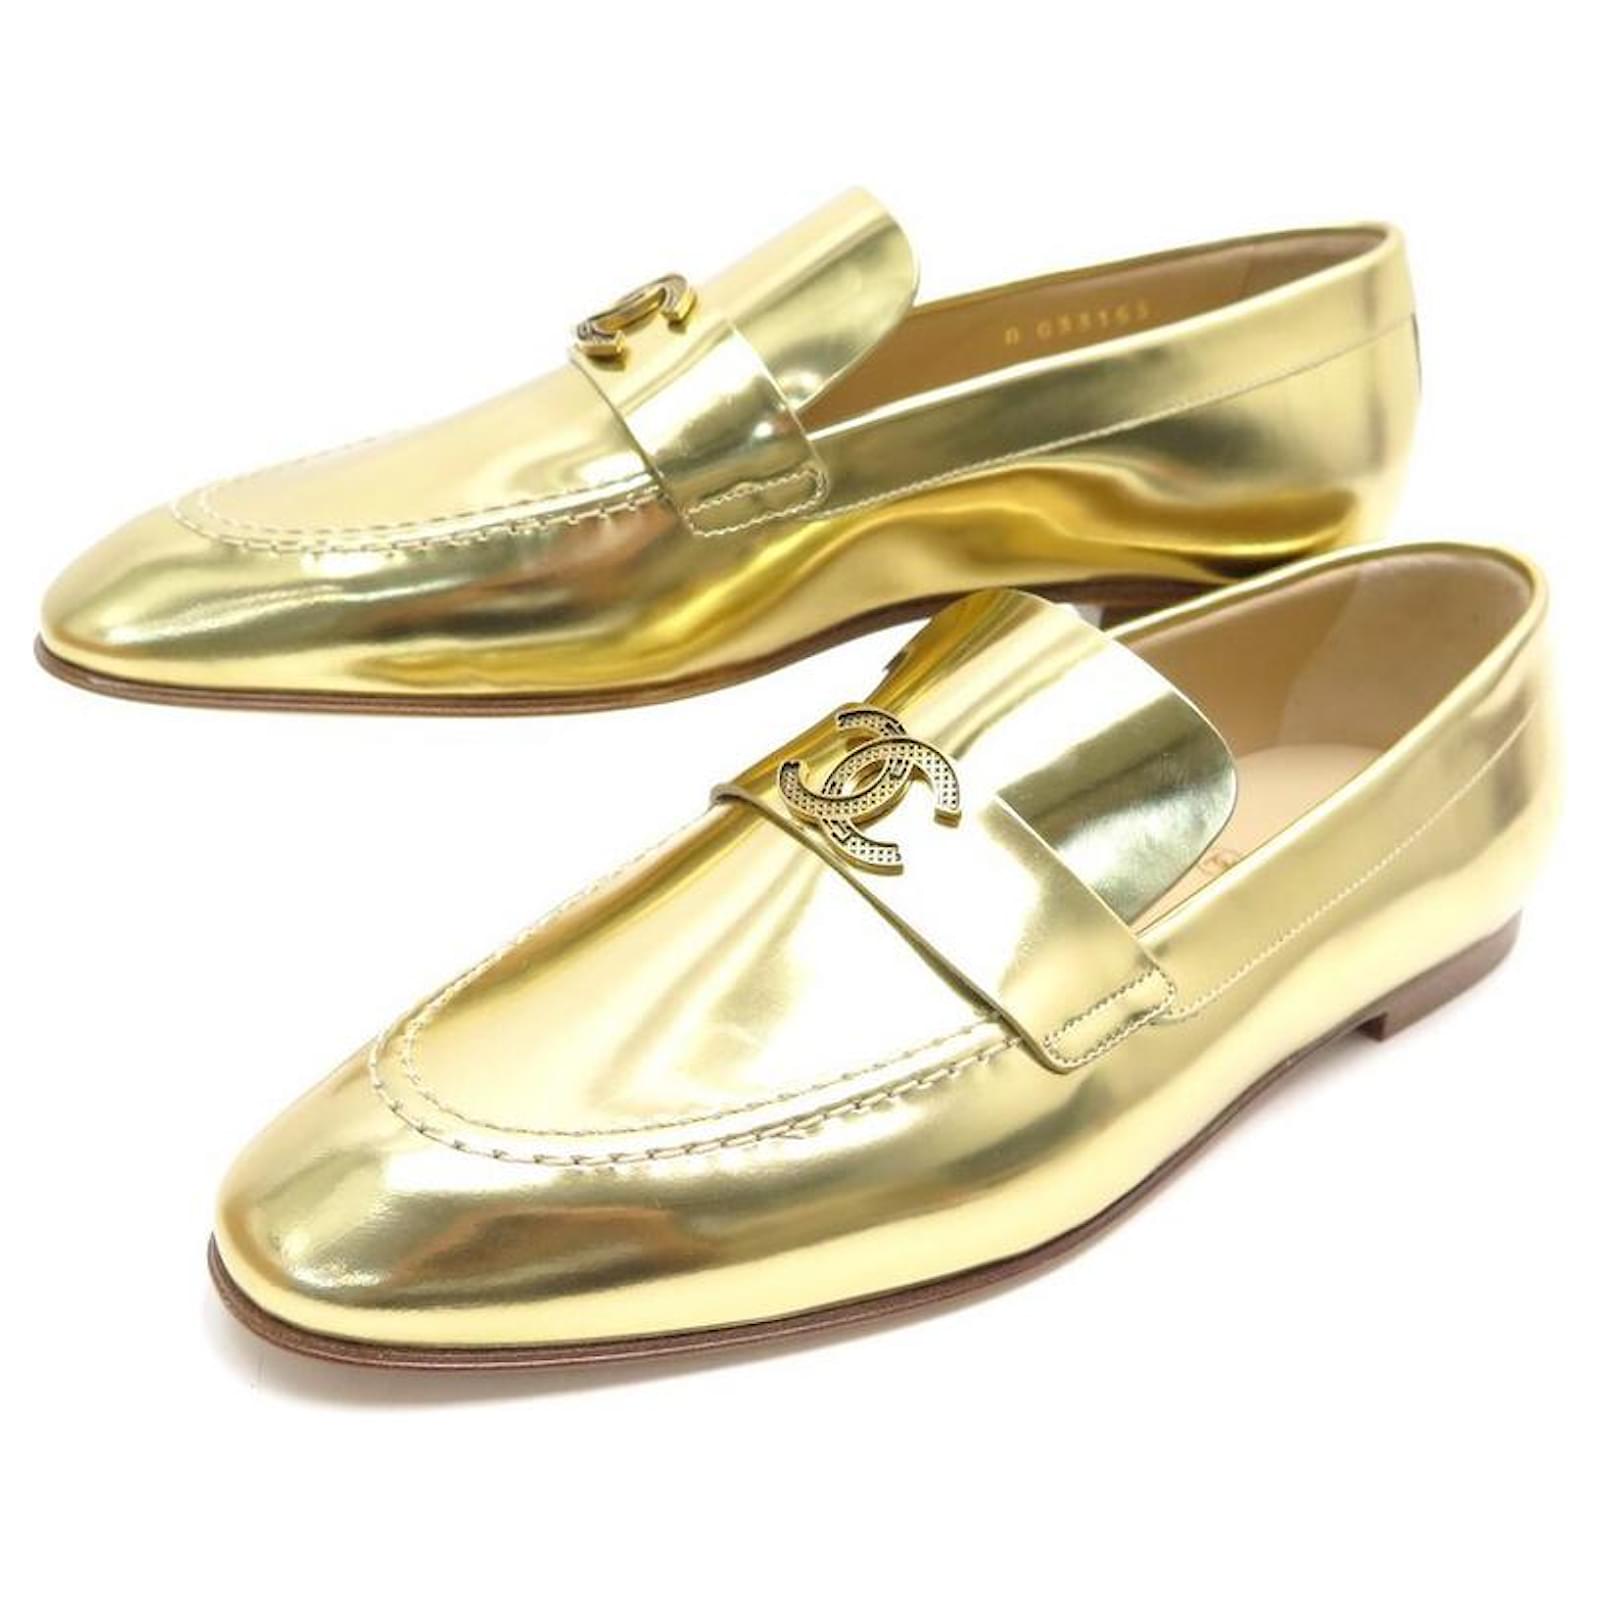 NEW CHANEL G SHOES33153 Church´s Loafers 39 GOLDEN LEATHER FLAT